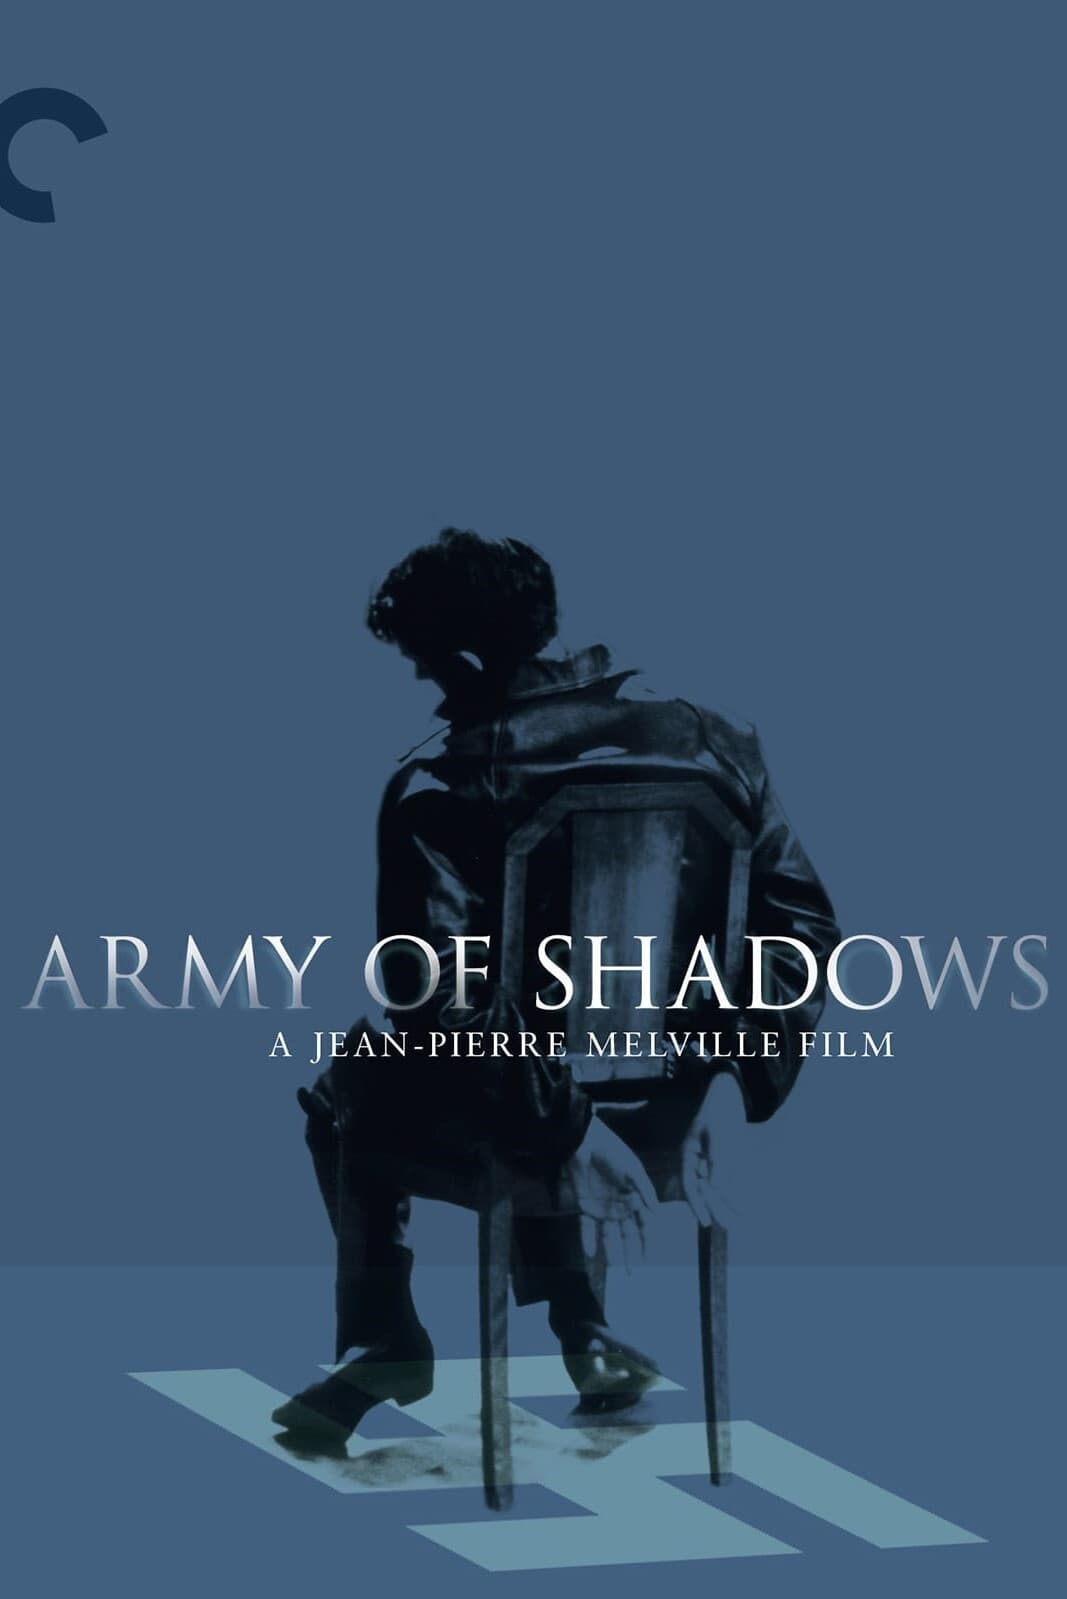 Jean-Pierre Melville and Army of Shadows (2002)